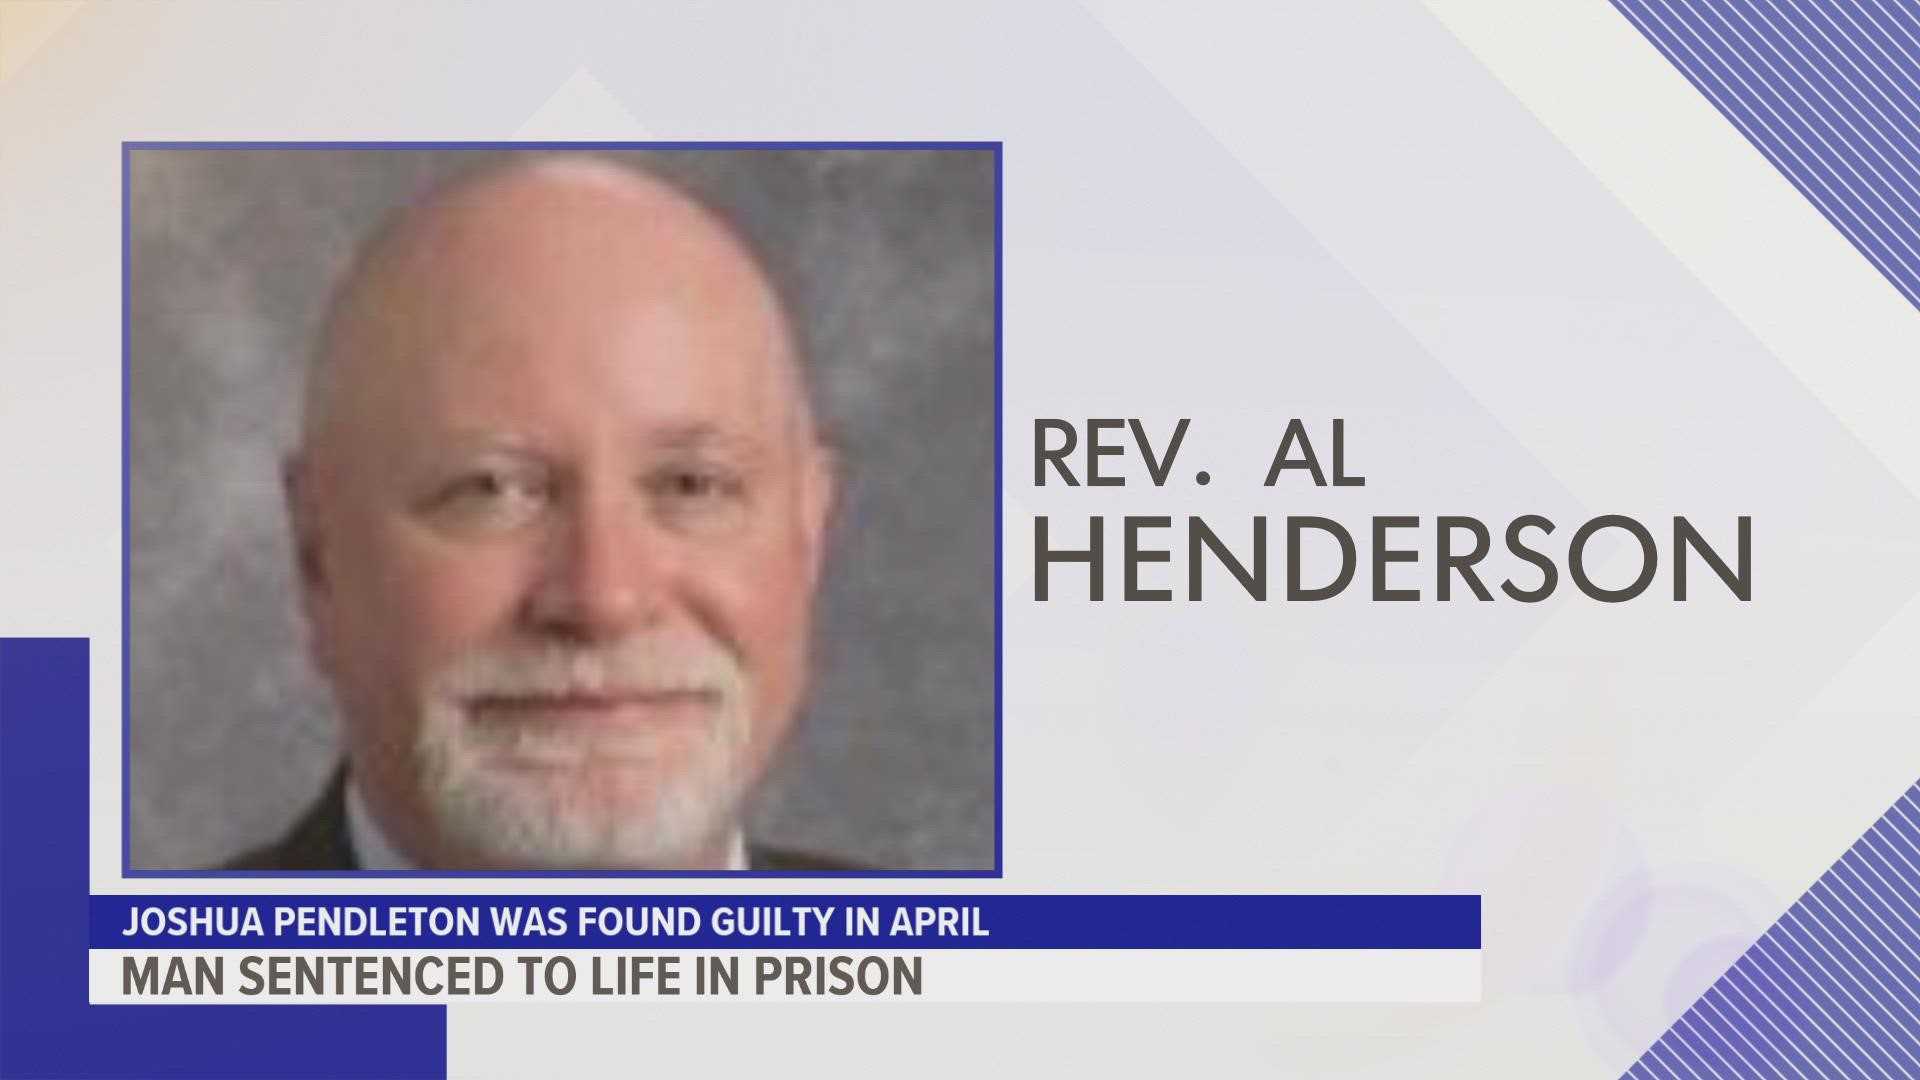 Joshua Pendleton was sentenced Friday after being convicted in April of first-degree murder in the death of Rev. Al Henderson.